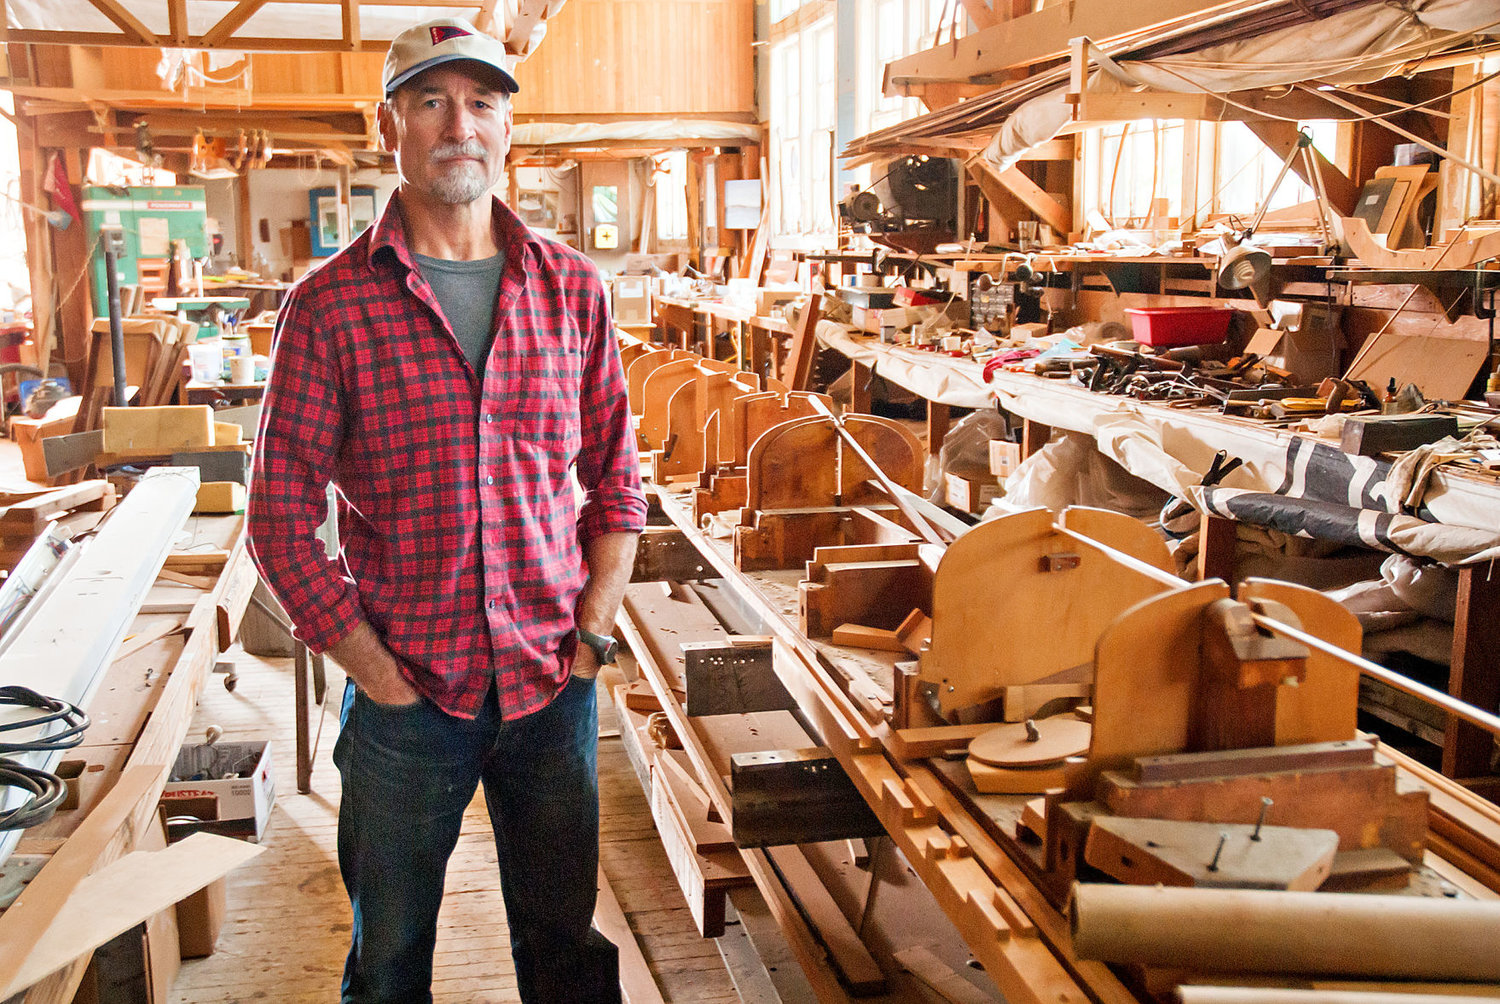 Boat making tools surround Steve Chapin as he stands inside his Point Hudson boat shop Aug. 14. Photo by Chris Tucker